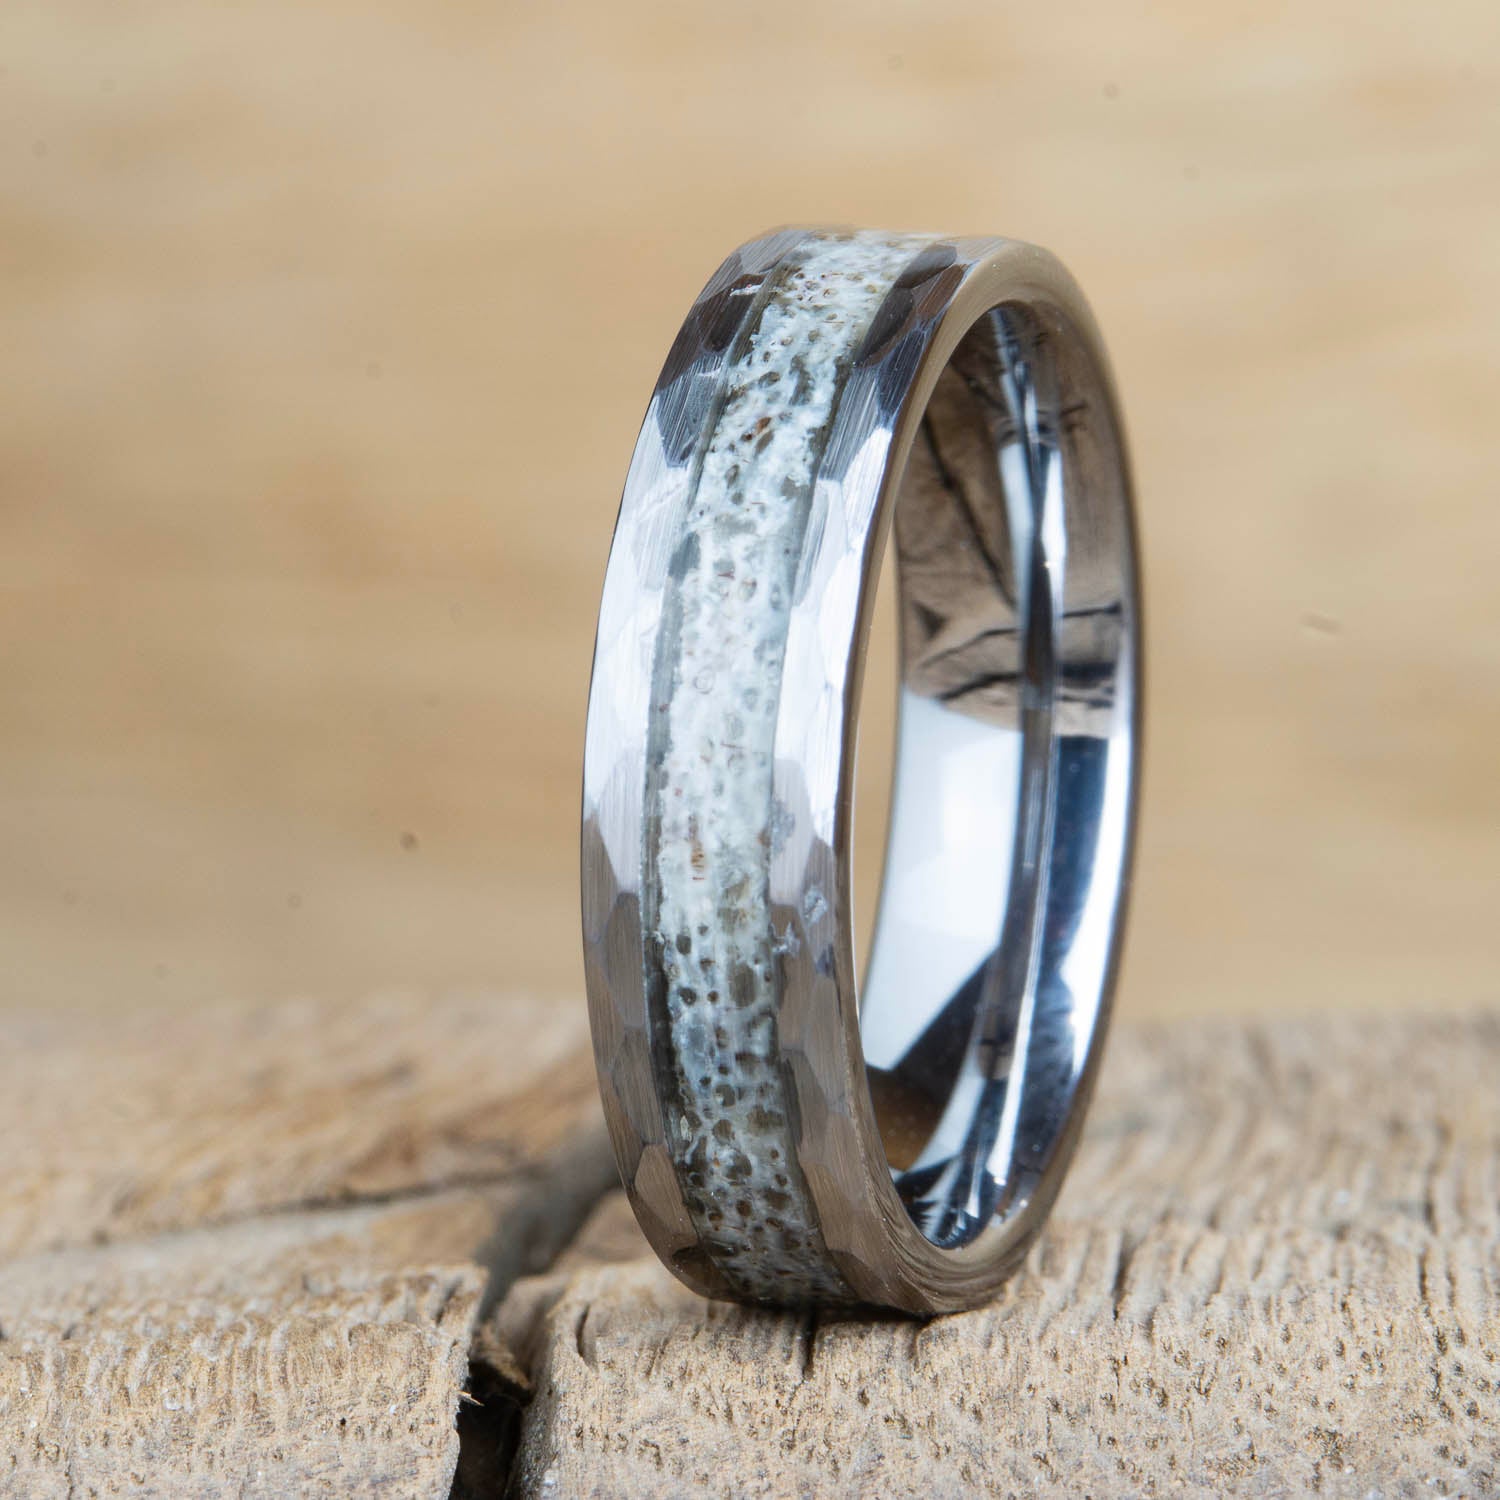 The hammered stag- Tungsten ring with hammered finish and antler 6mm